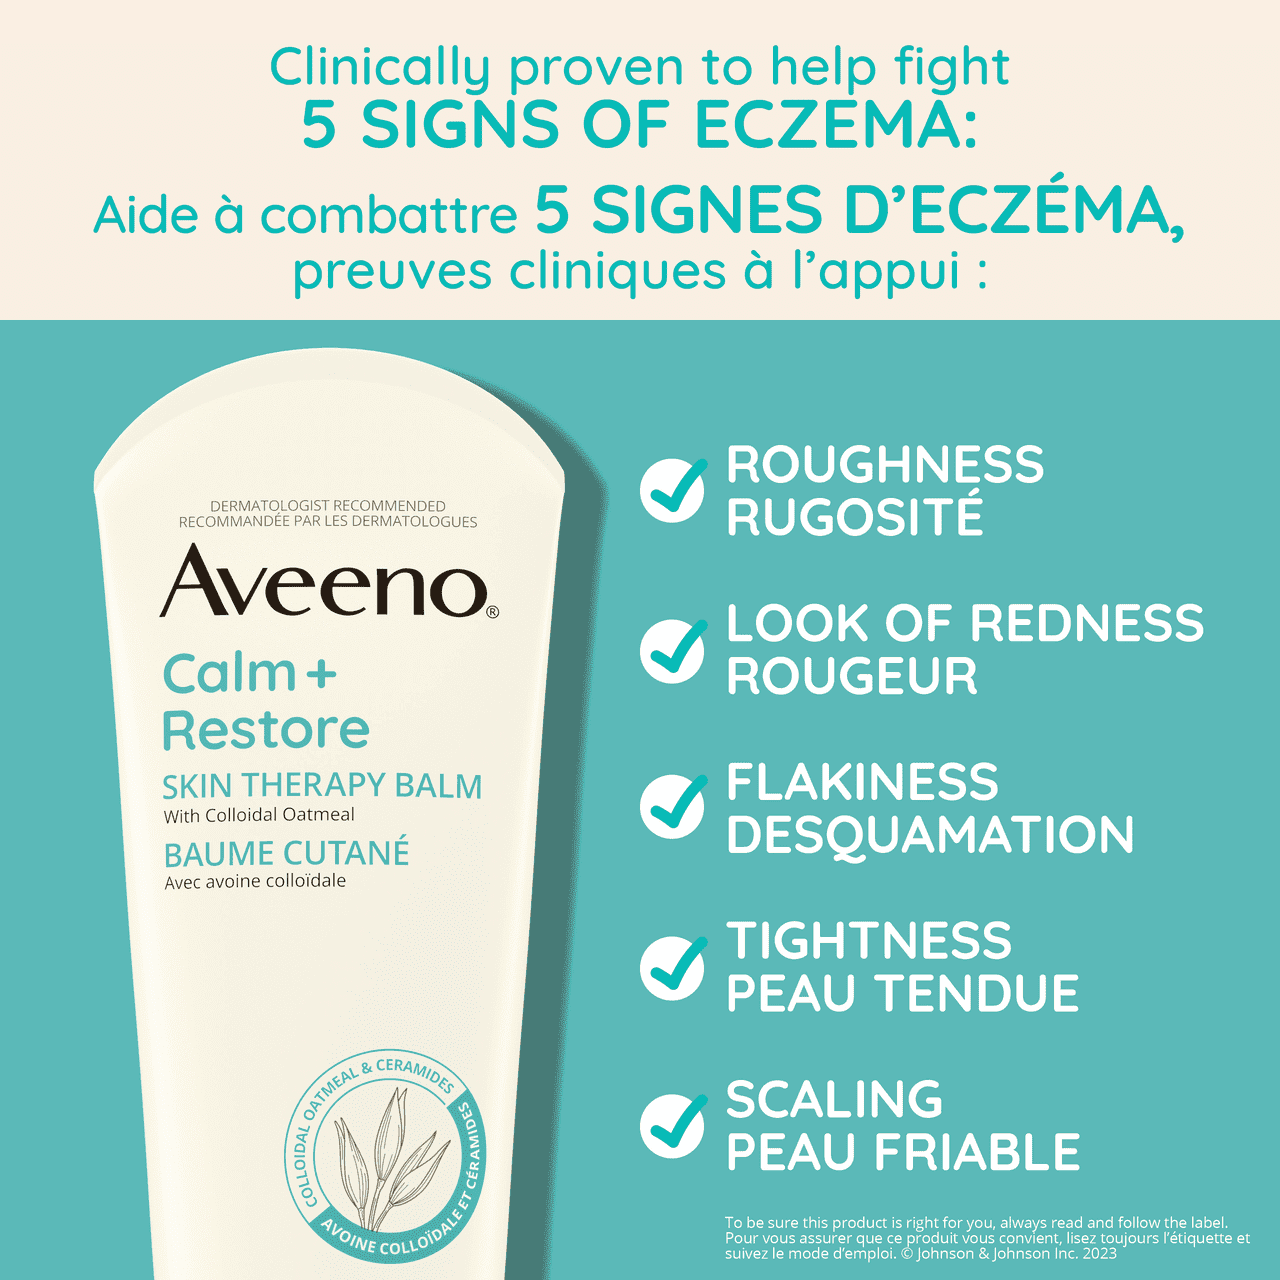 AVEENO® Calm + Restore Skin Therapy Balm with a claim stating ' Clinically proven to help fight 5 Signs of Eczema: Roughness, Redness, Flakiness, Tightness, Scaling'